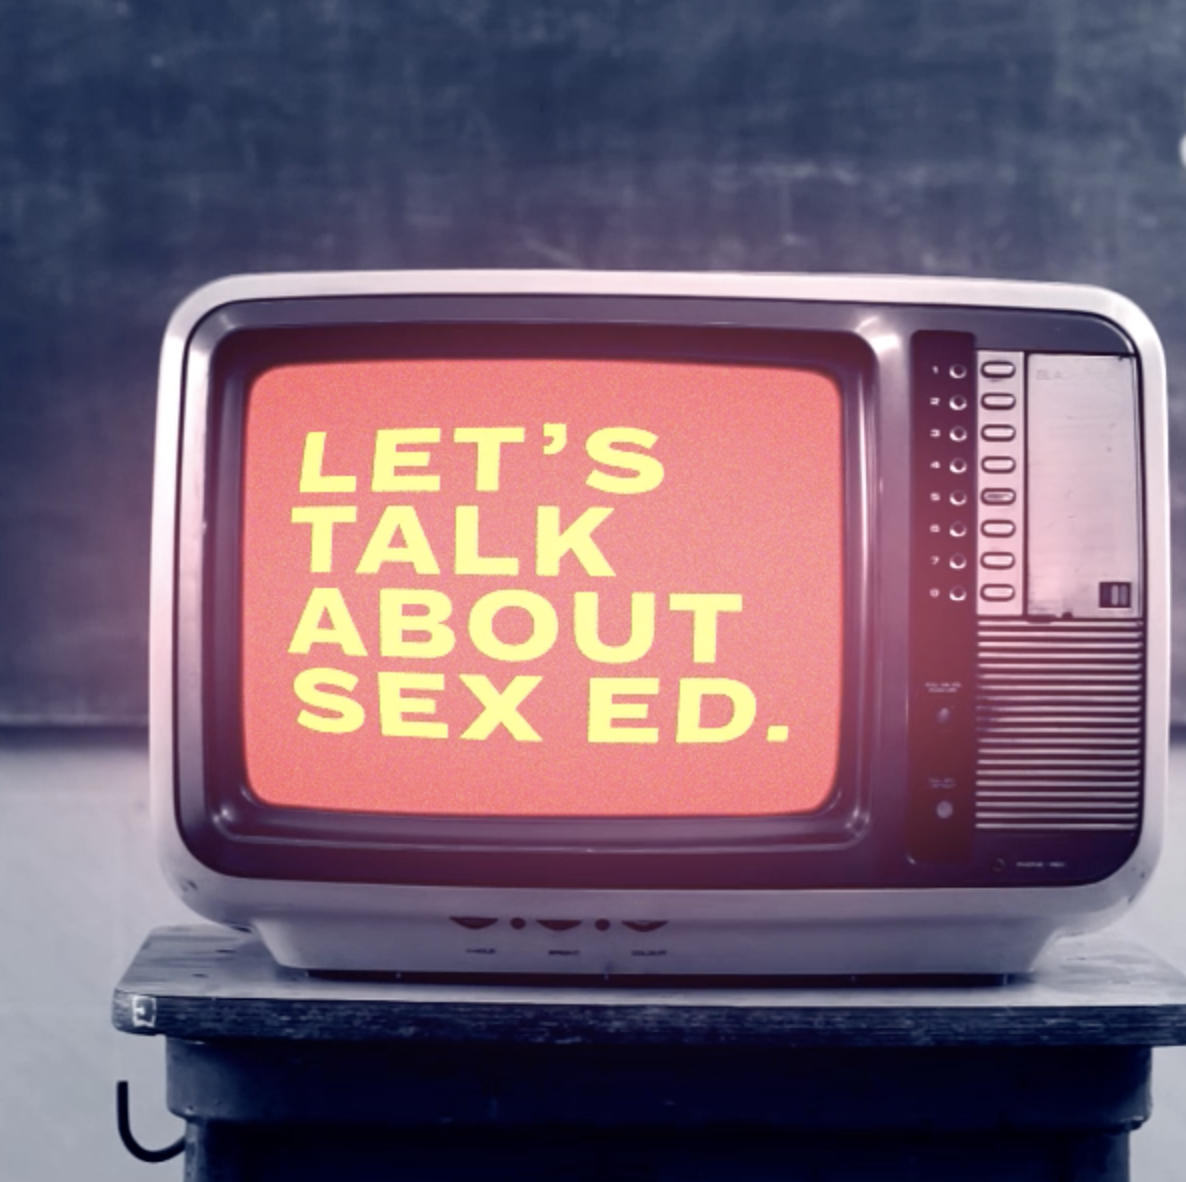 Sixth Grade Sex - Let's Talk About Sex Ed